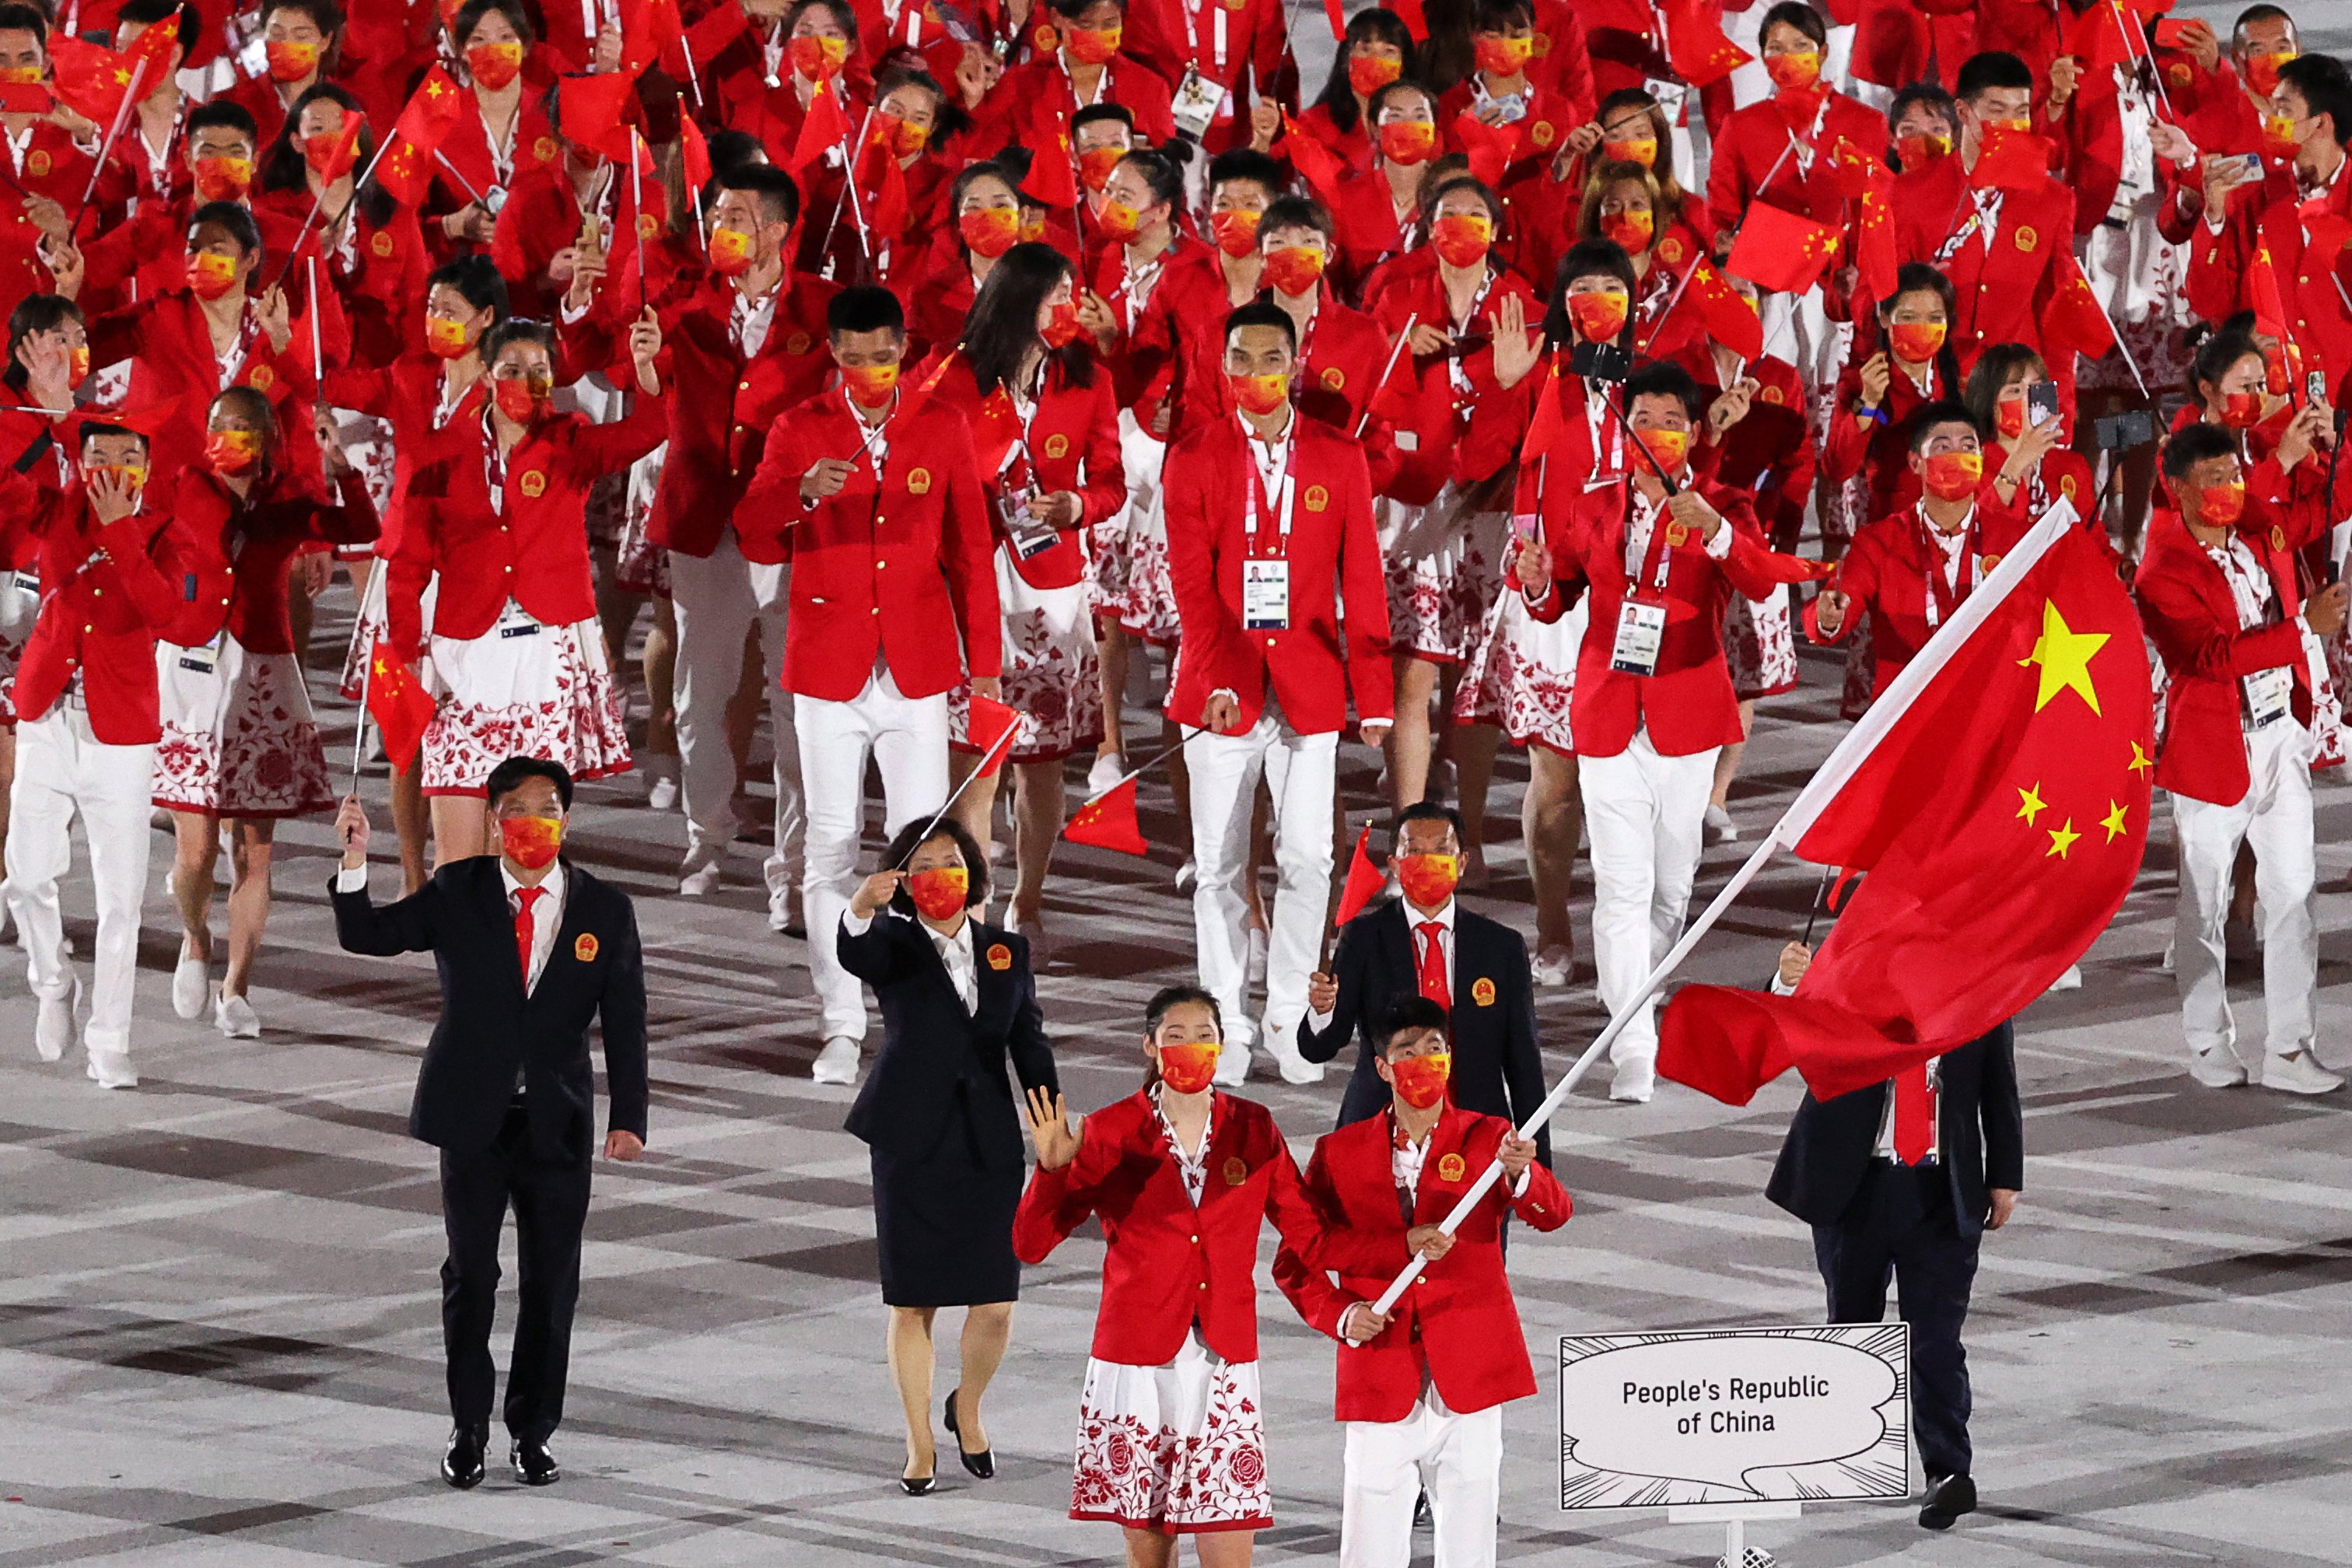 Opening ceremony of Summer Olympic Games in Tokyo, Japan